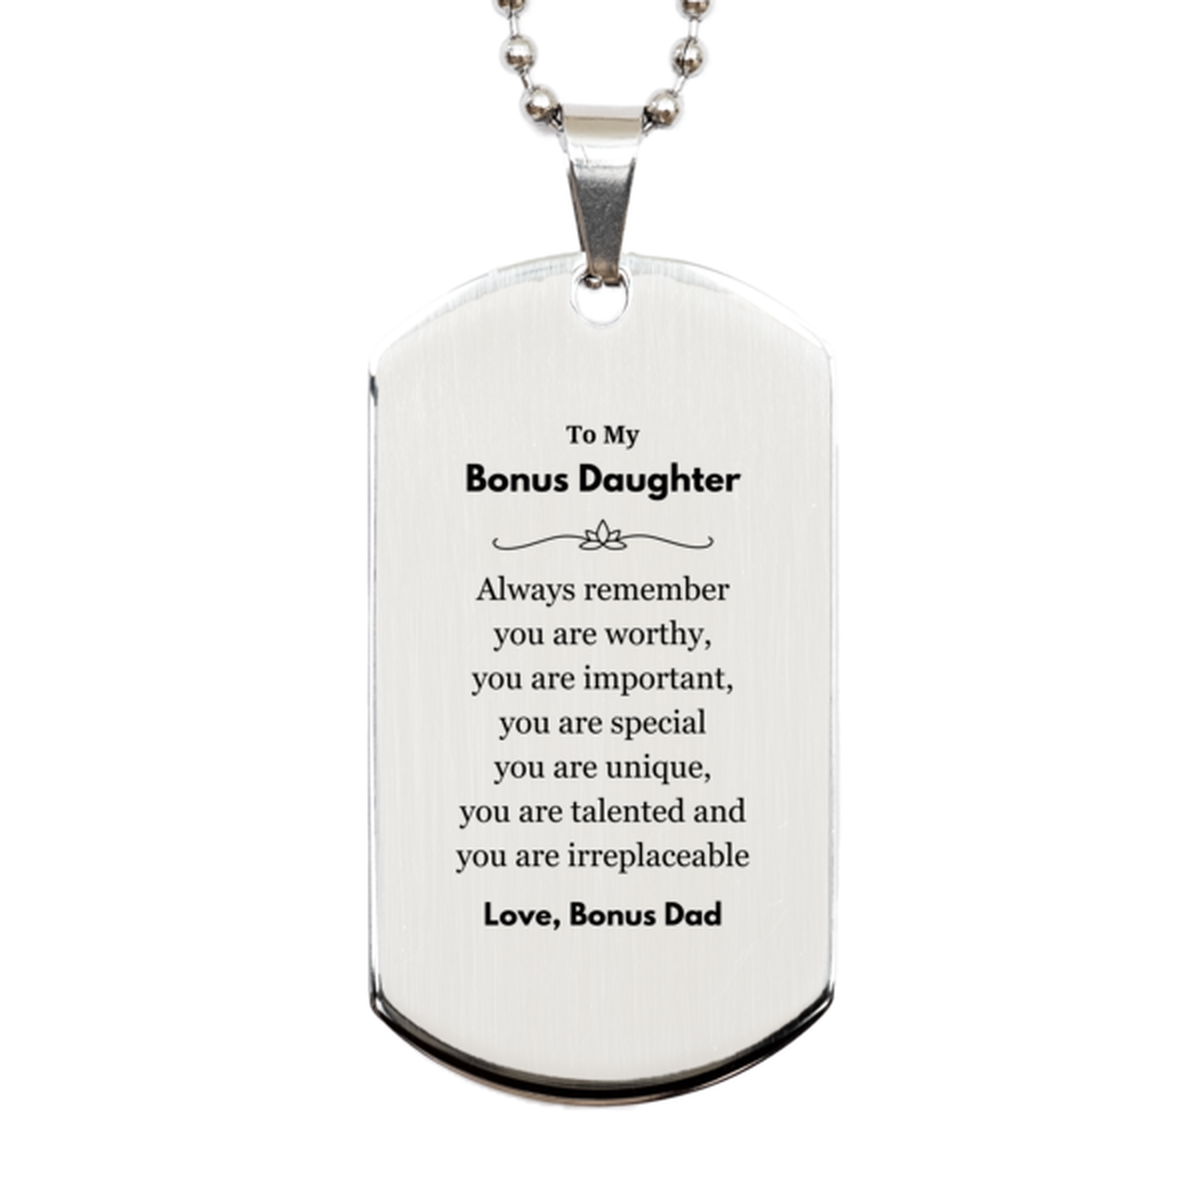 Bonus Daughter Birthday Gifts from Bonus Dad, Inspirational Silver Dog Tag for Bonus Daughter Christmas Graduation Gifts for Bonus Daughter Always remember you are worthy, you are important. Love, Bonus Dad